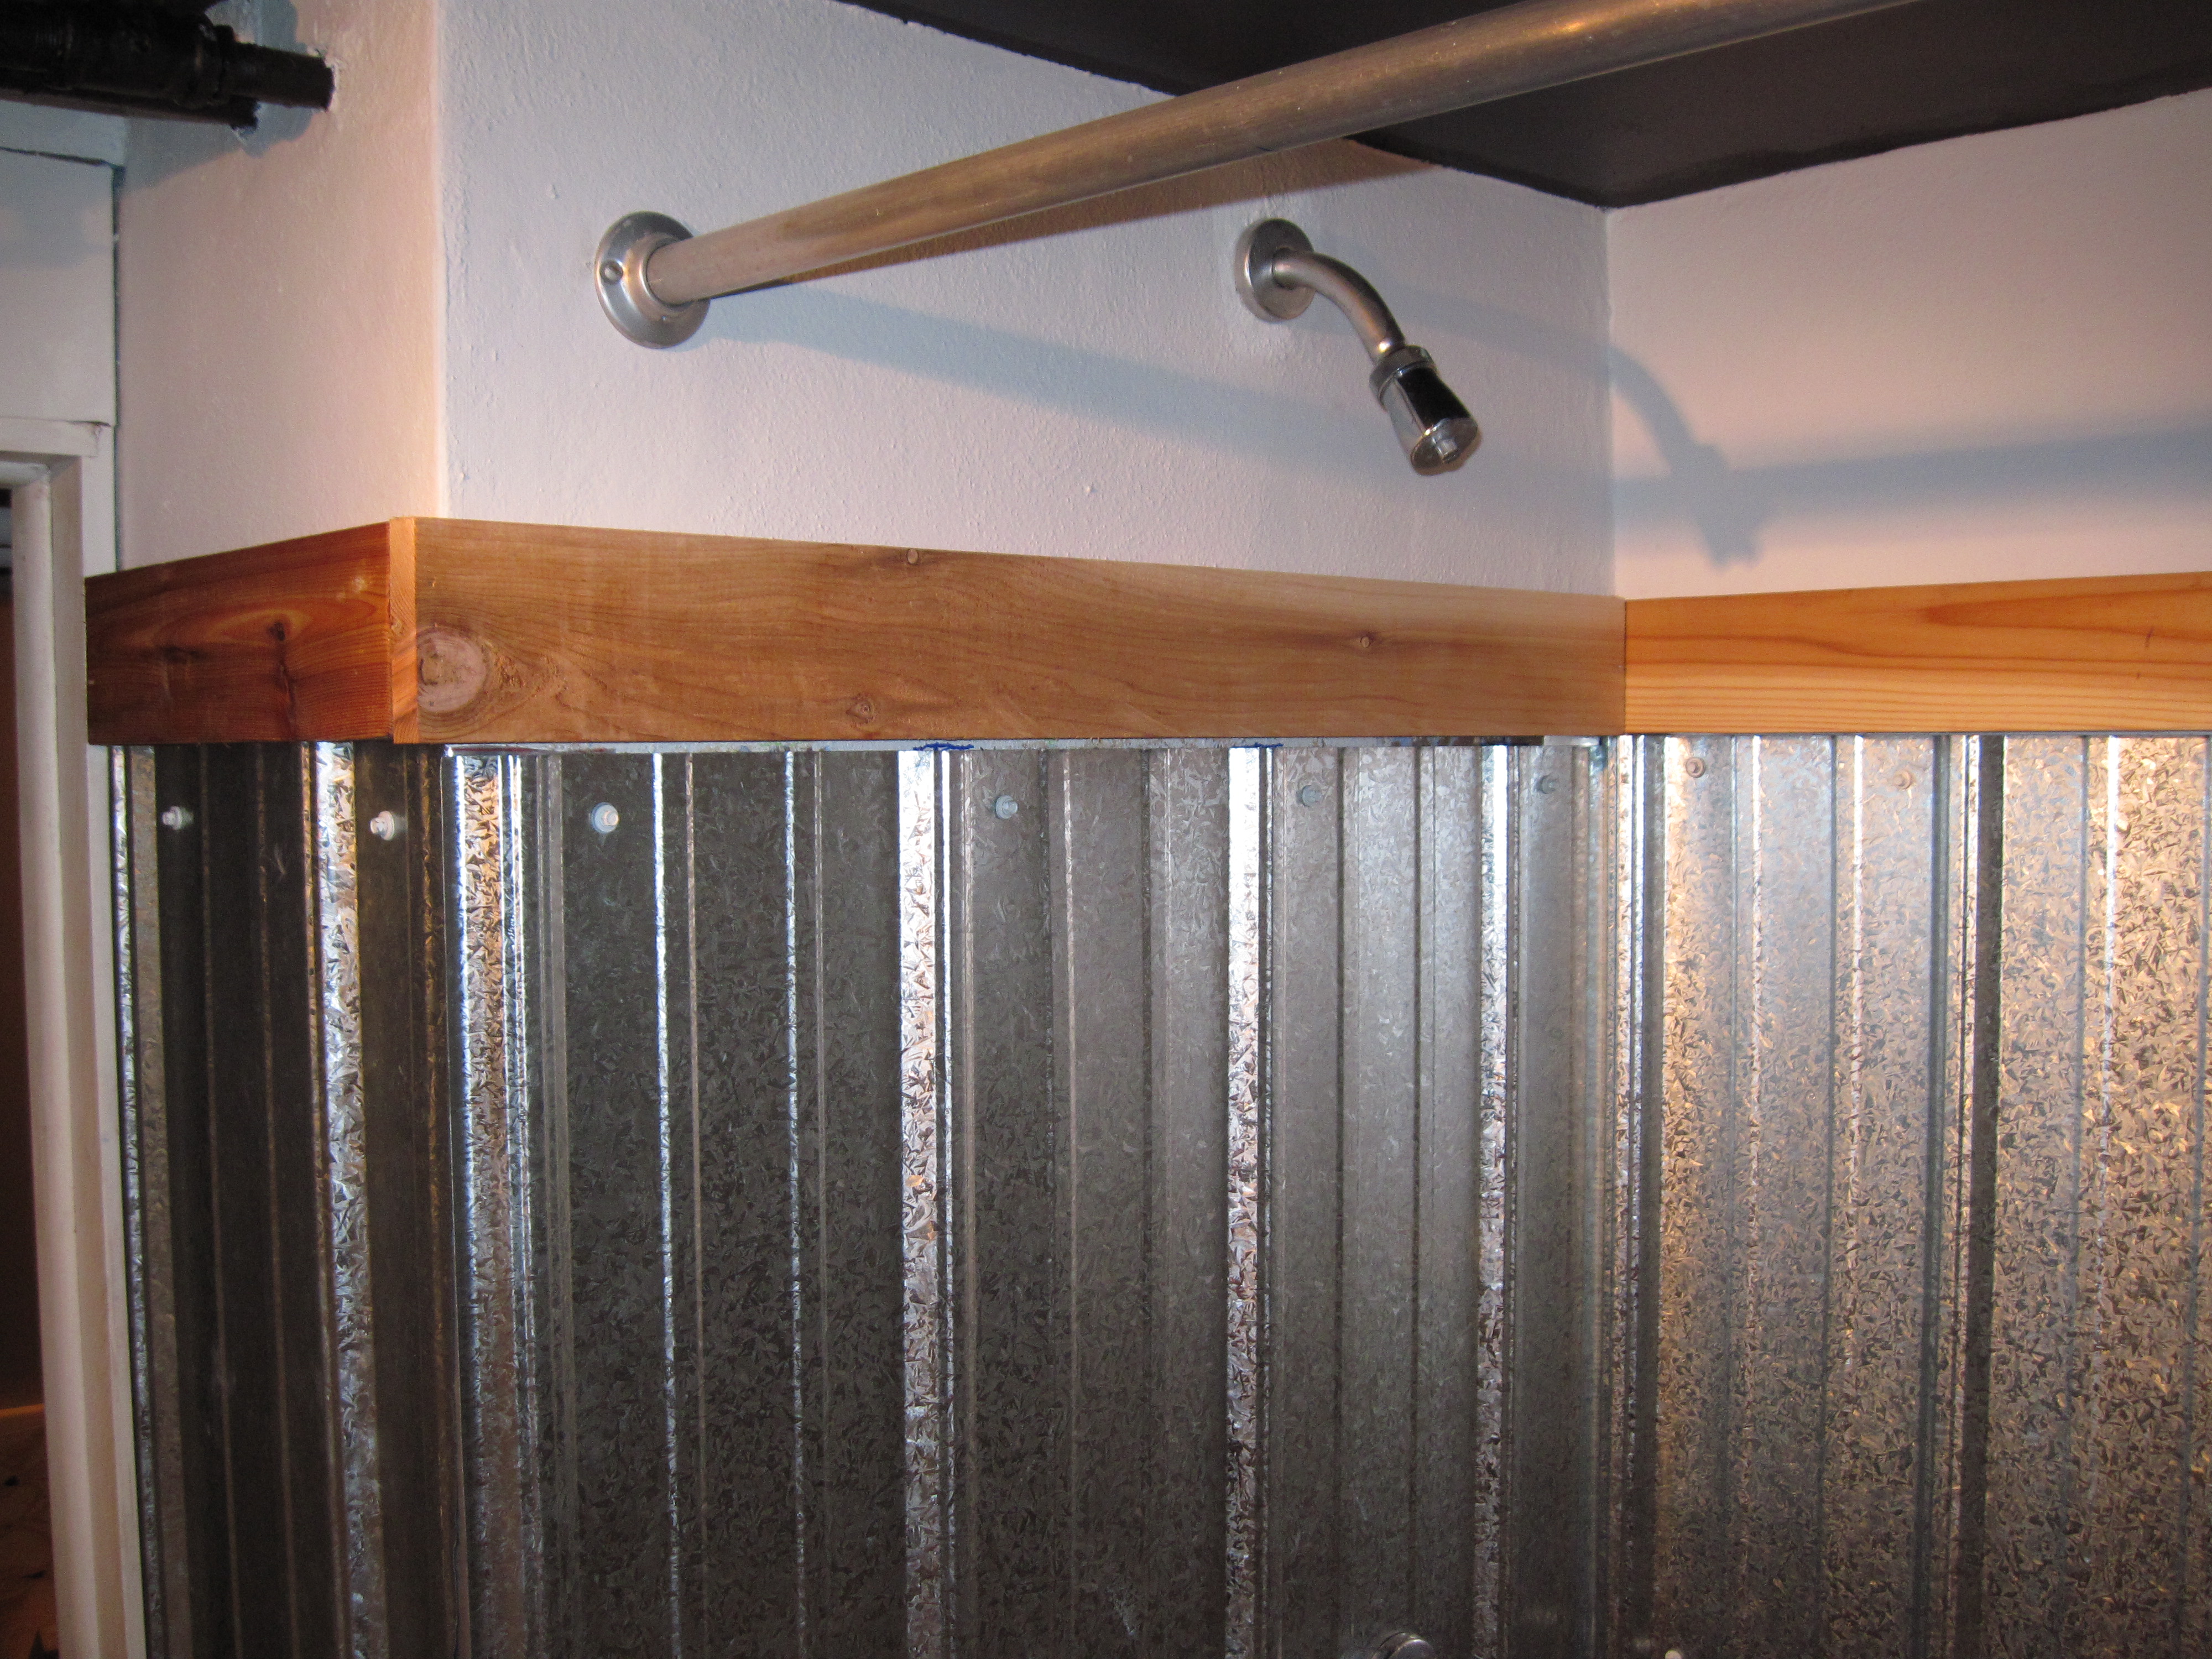  Galvanized  Shower  Surround A Complete How To Bungalow 